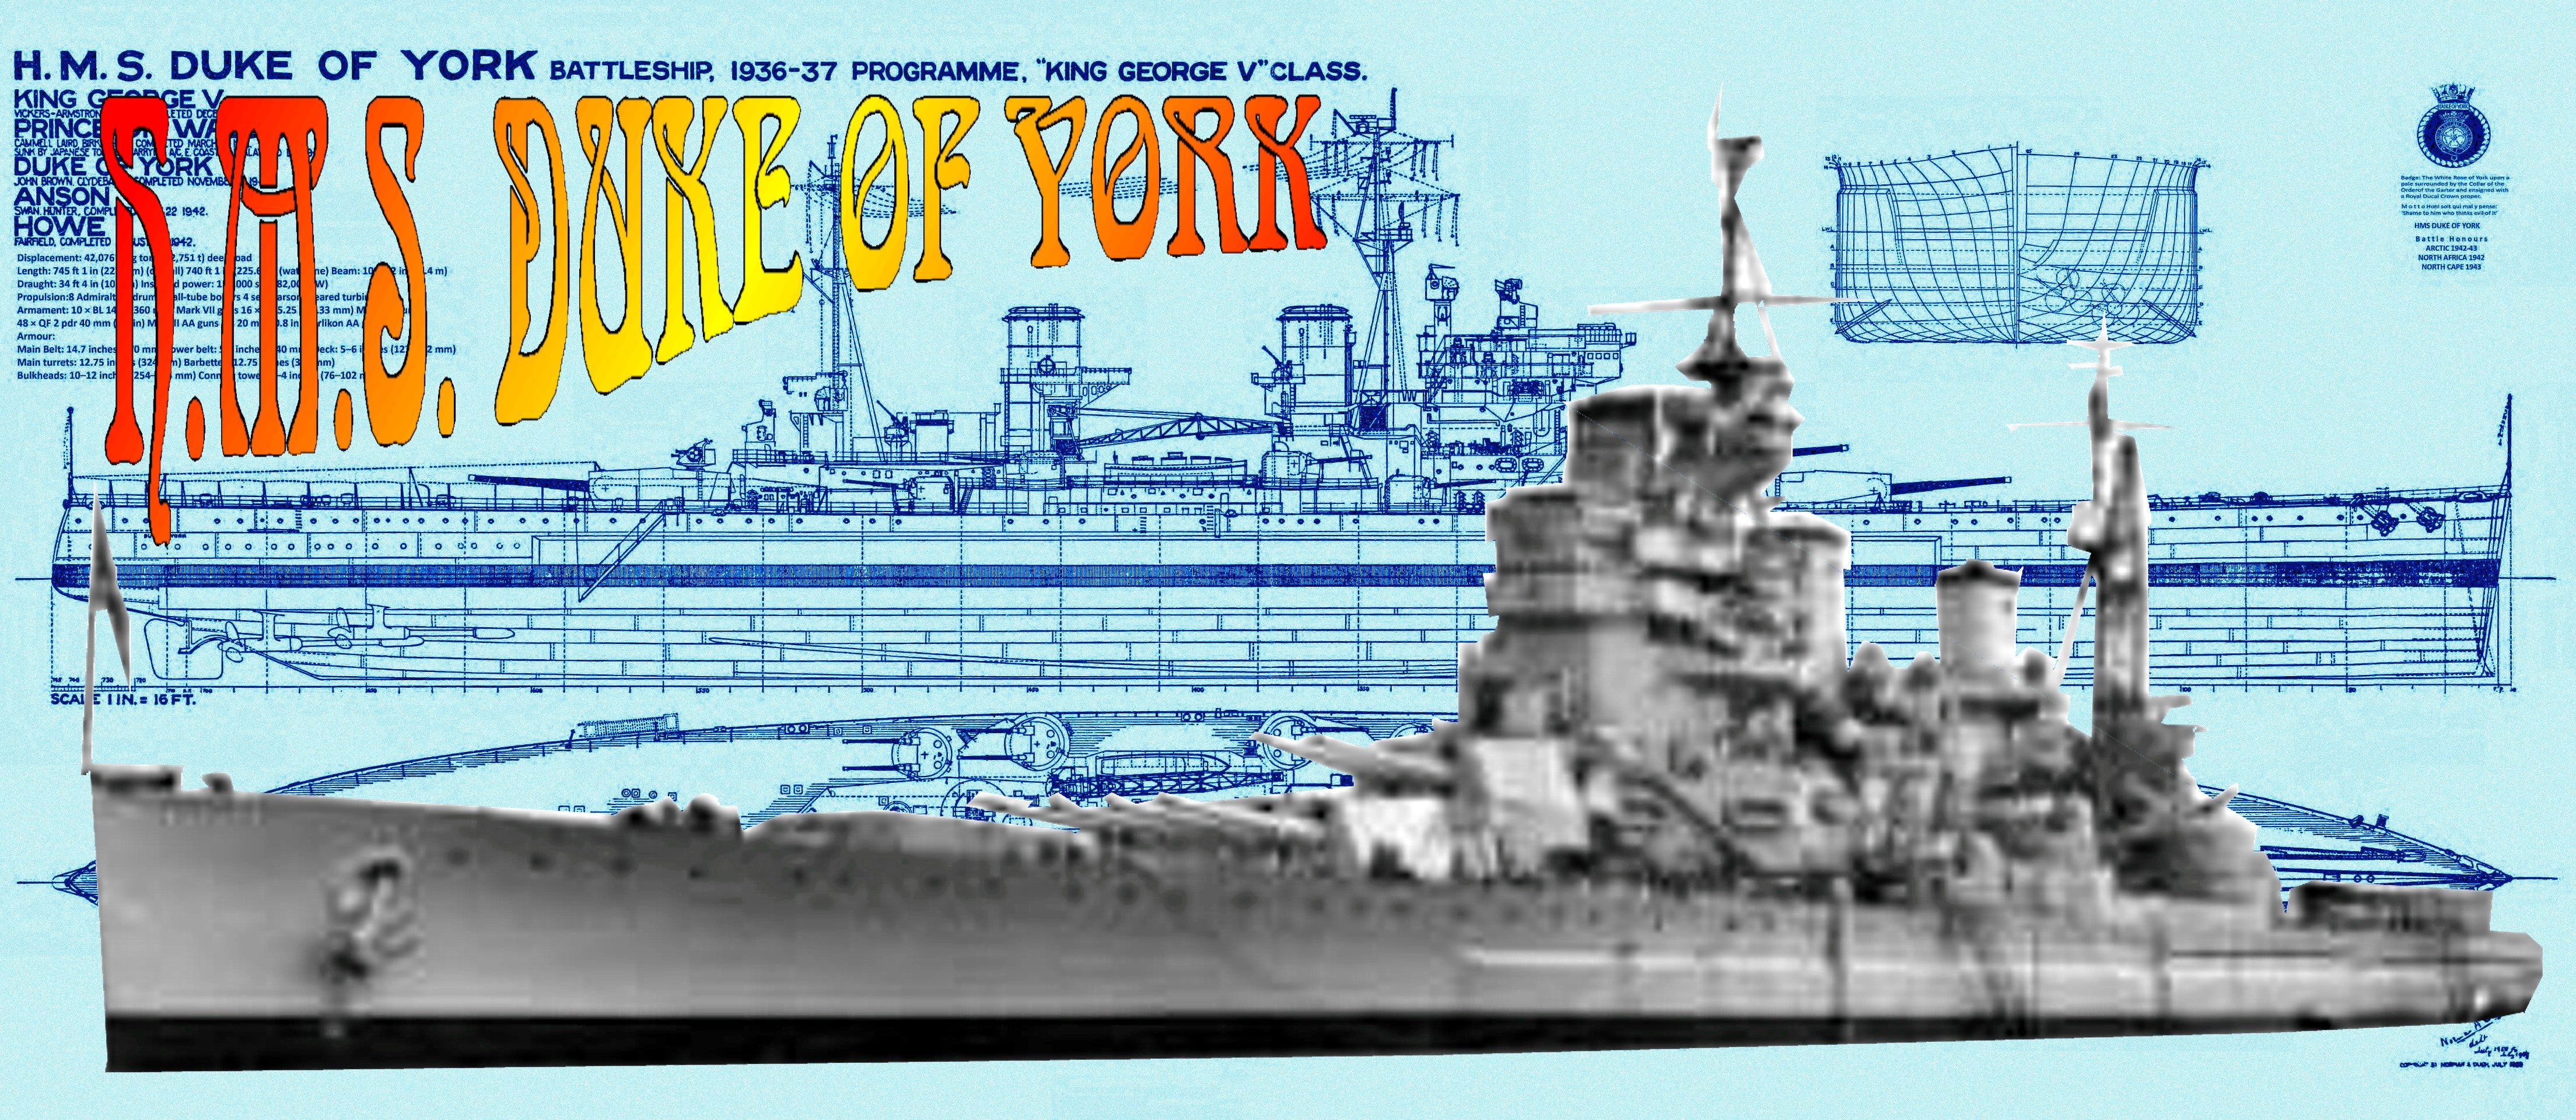 full size printed 1:192 scale drawing  british battleship h.m.s. duke of york with article